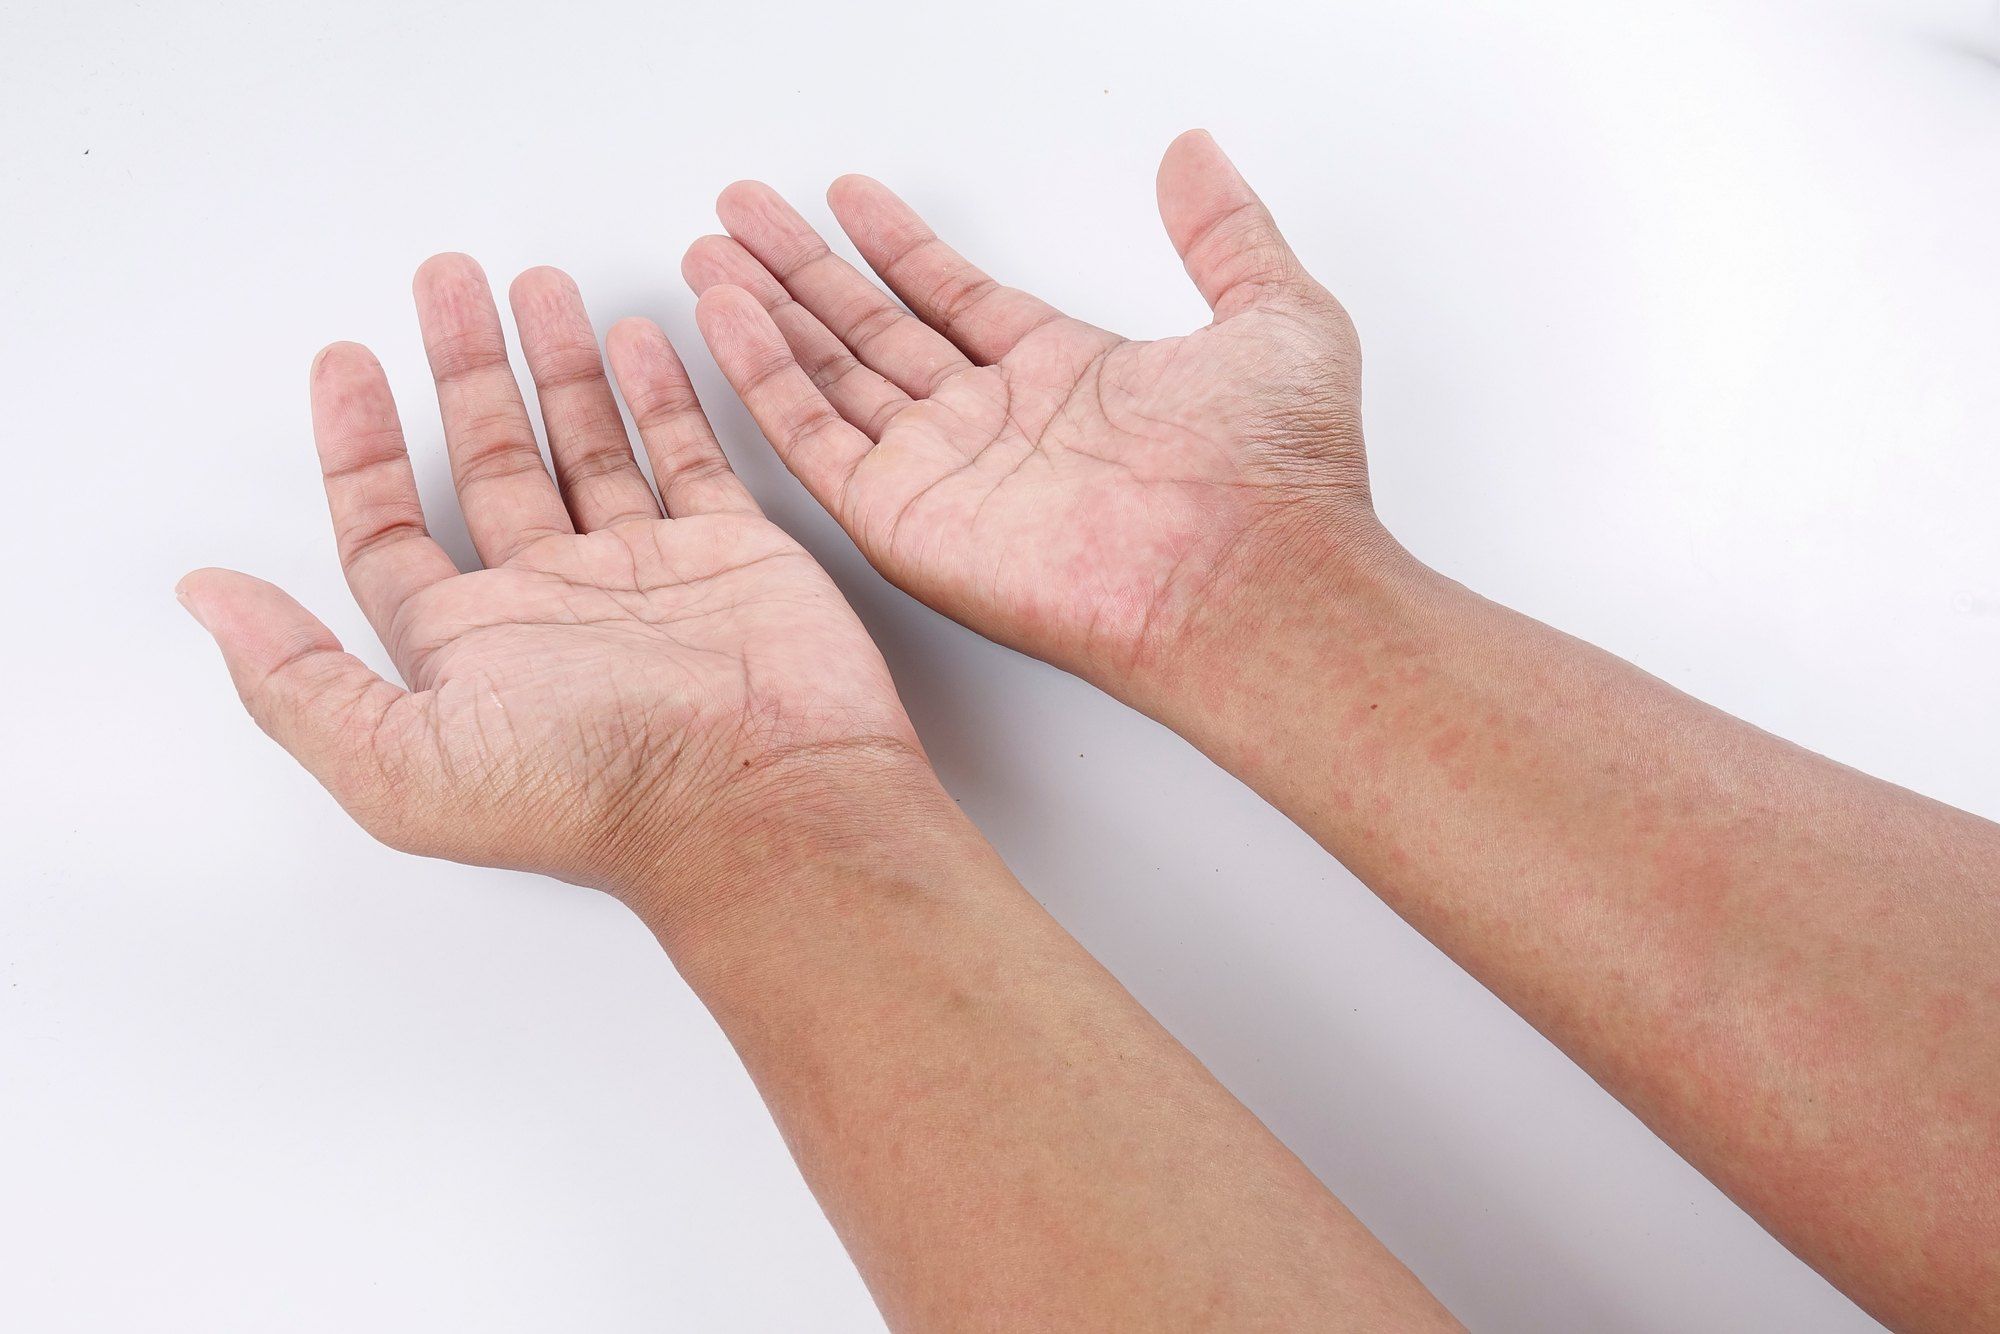 arms and hands with allergic rash